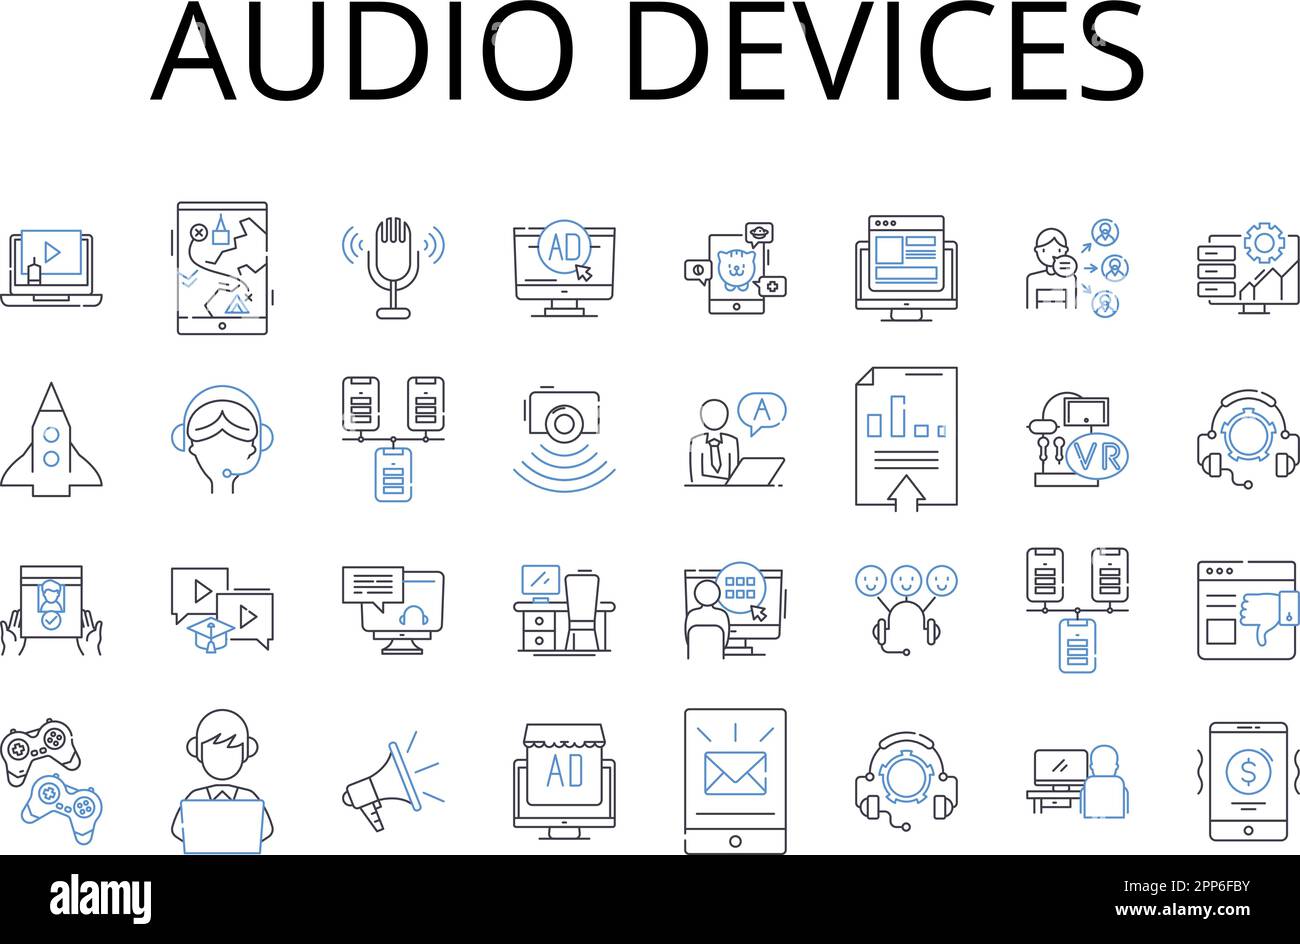 Audio devices line icons collection. Text messages, Video games, Musical instruments, Security systems, Image editing, Social media, Mobile devices Stock Vector